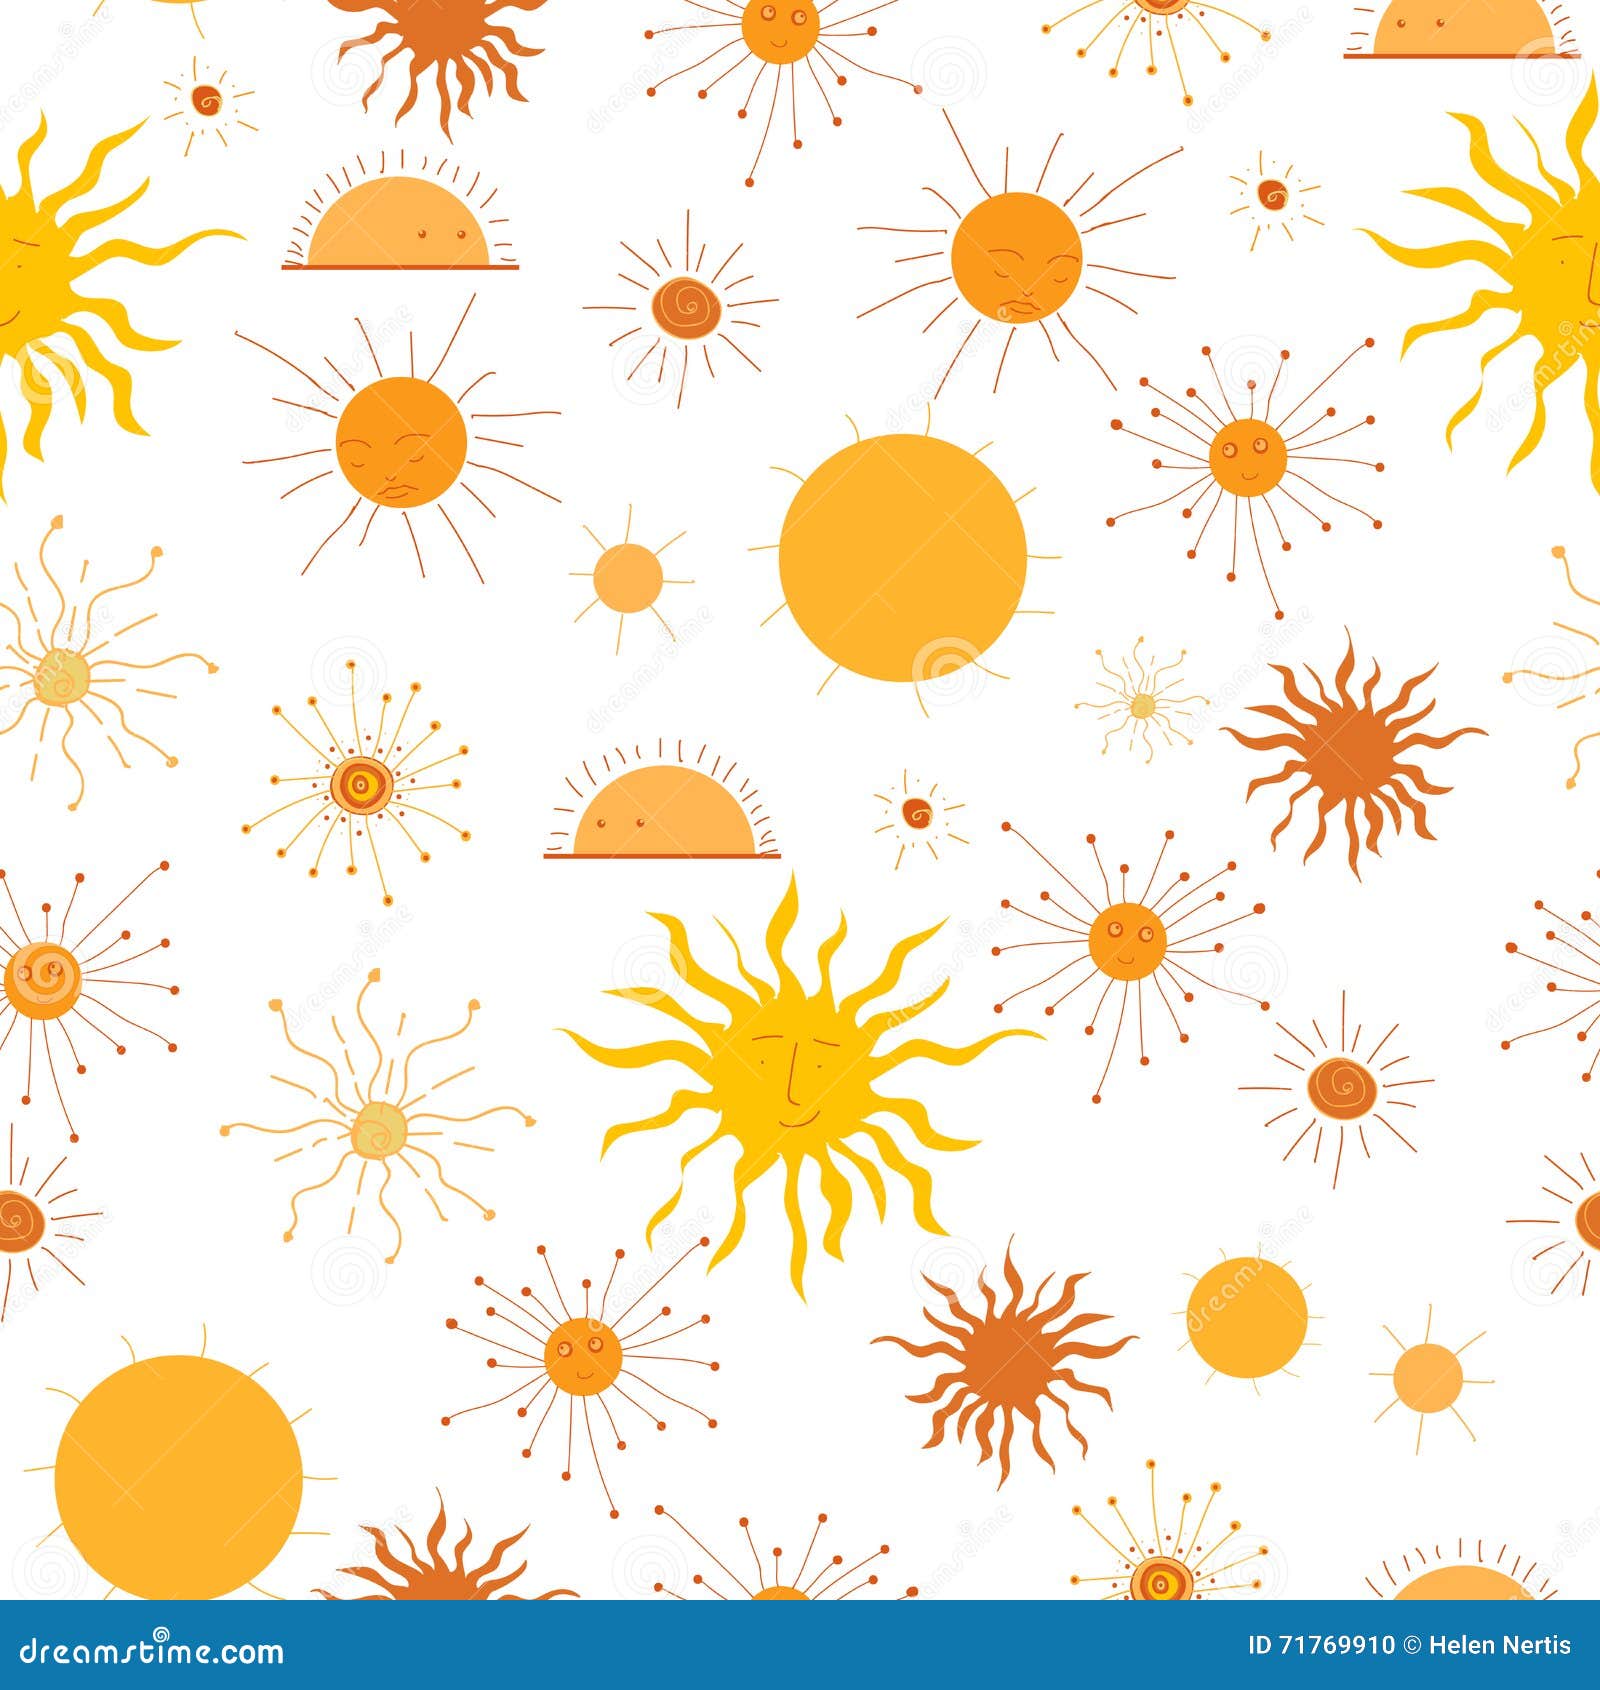 Sunny Wallpaper Vector Images over 20000